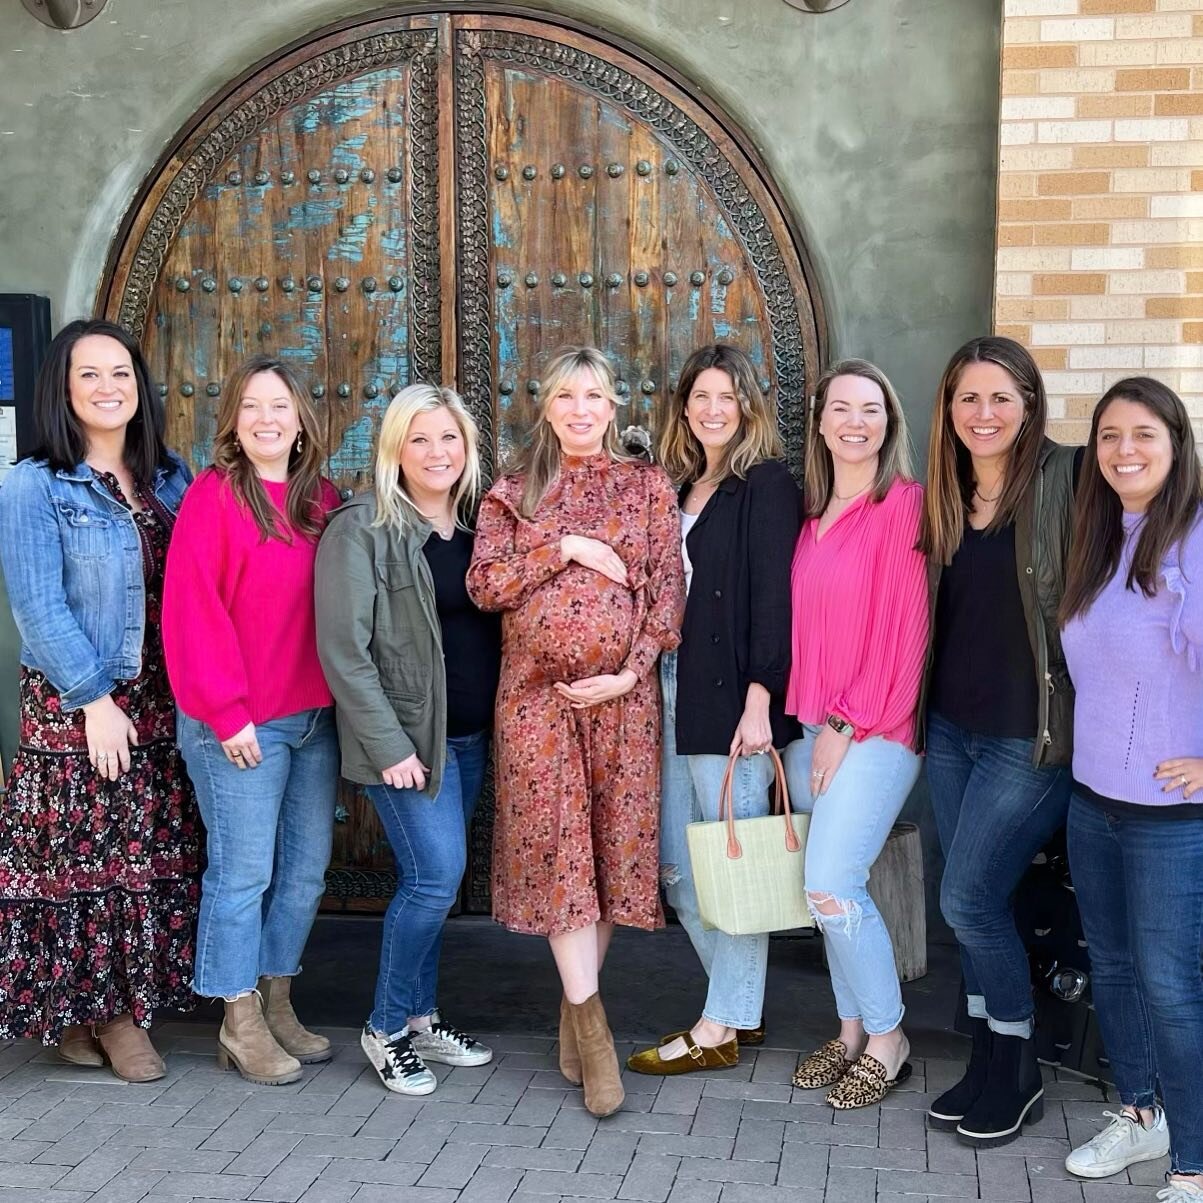 Baby girl💕 brunchin with all her besties! Grateful for these friends. #35weeks